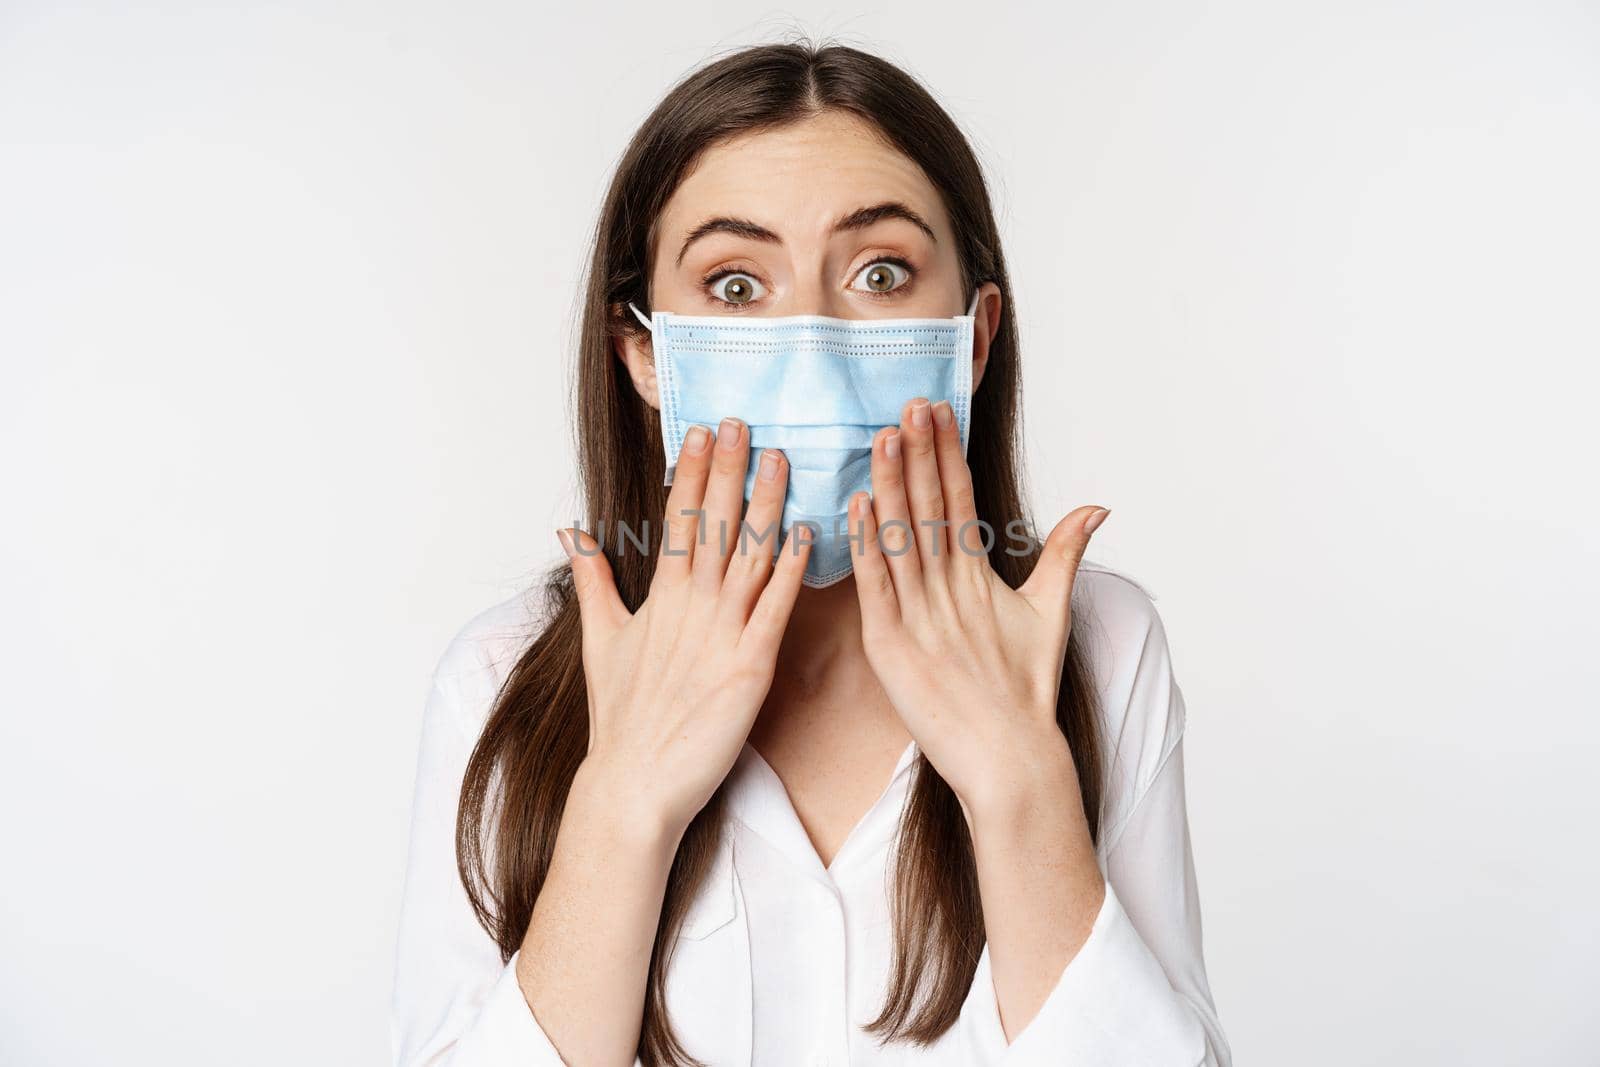 Covid and quarantine gesture. Young woman in face medical mask, looking surprised and shocked at camera, standing amazed against white background.